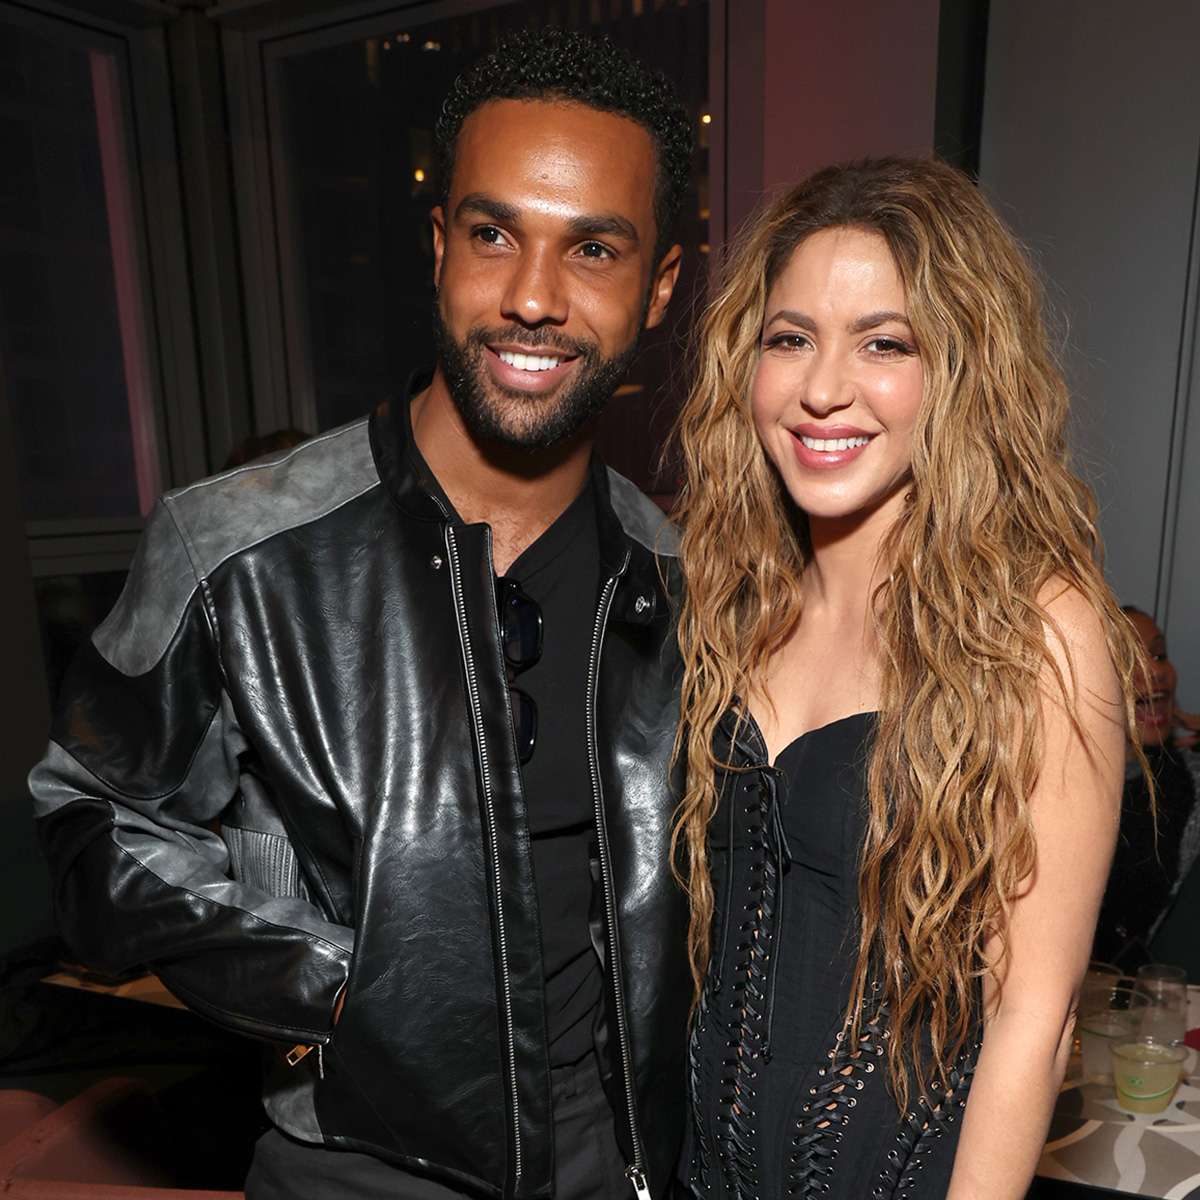 Shakira and Emily in Paris Star Lucien Laviscount Step Out for Dinner in NYC